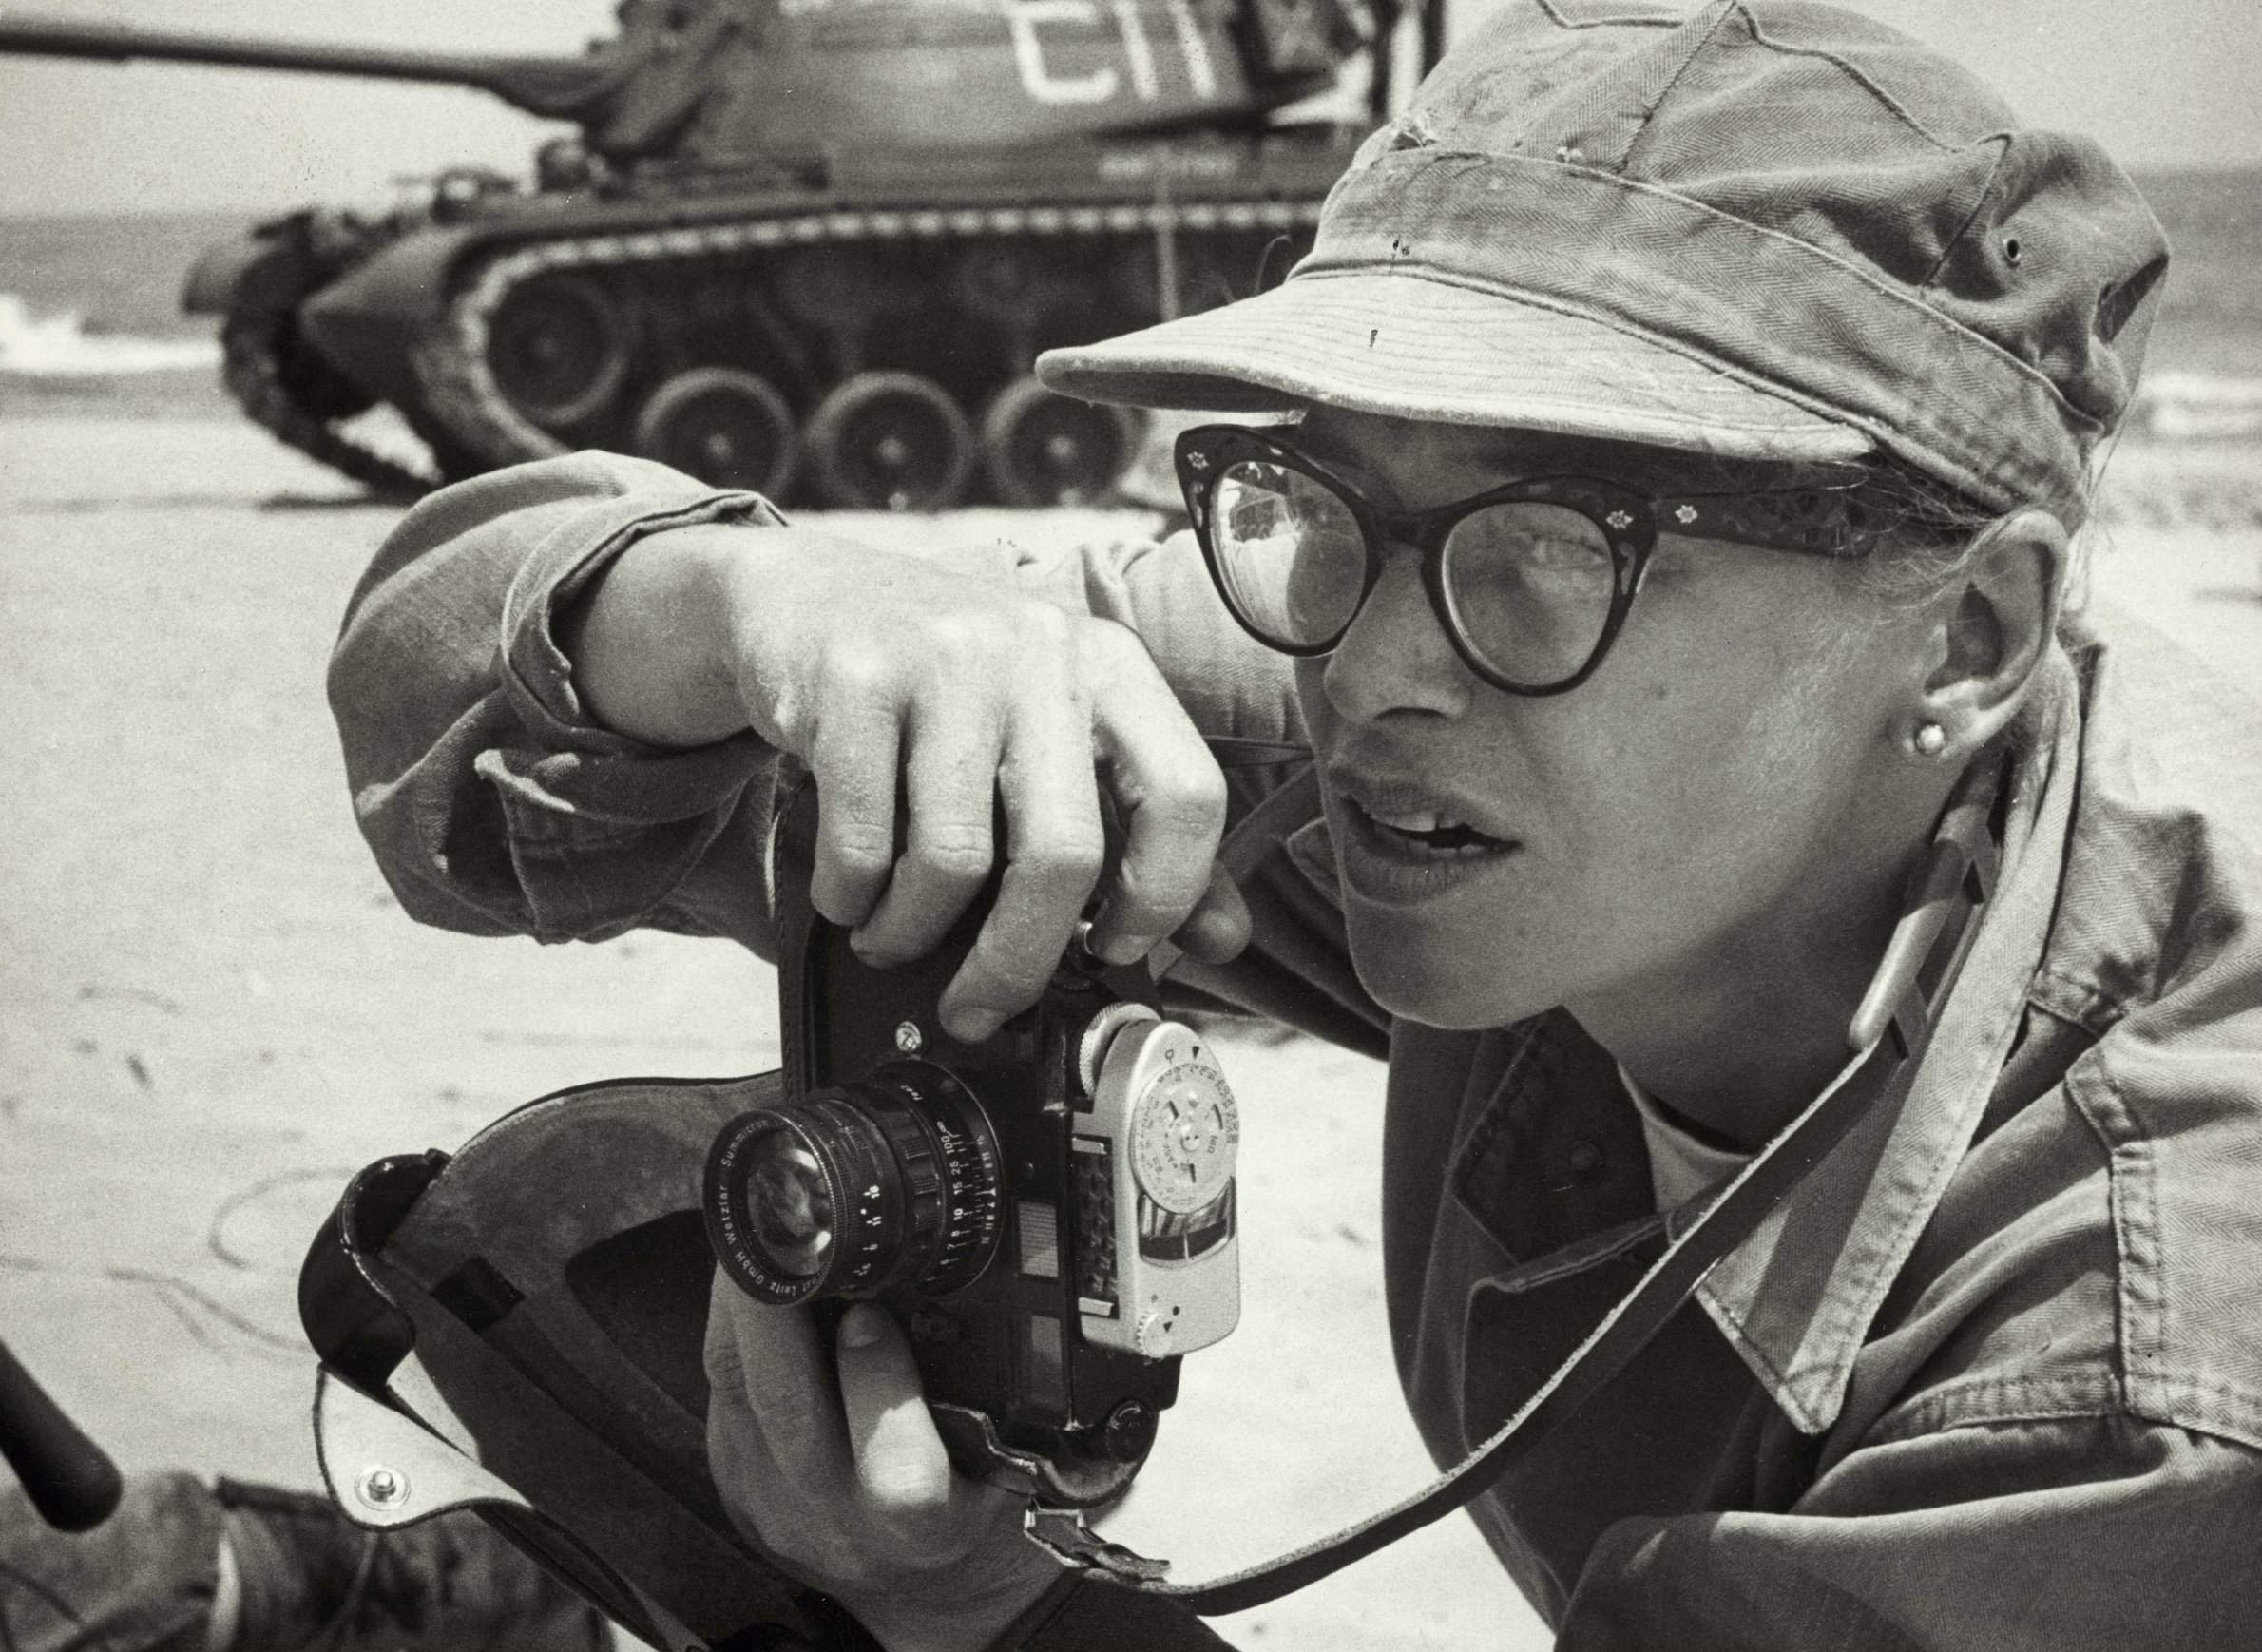 Dickey Chappelle won awards for her photographs for National Geographic. She was killed on a patrol in 1965.